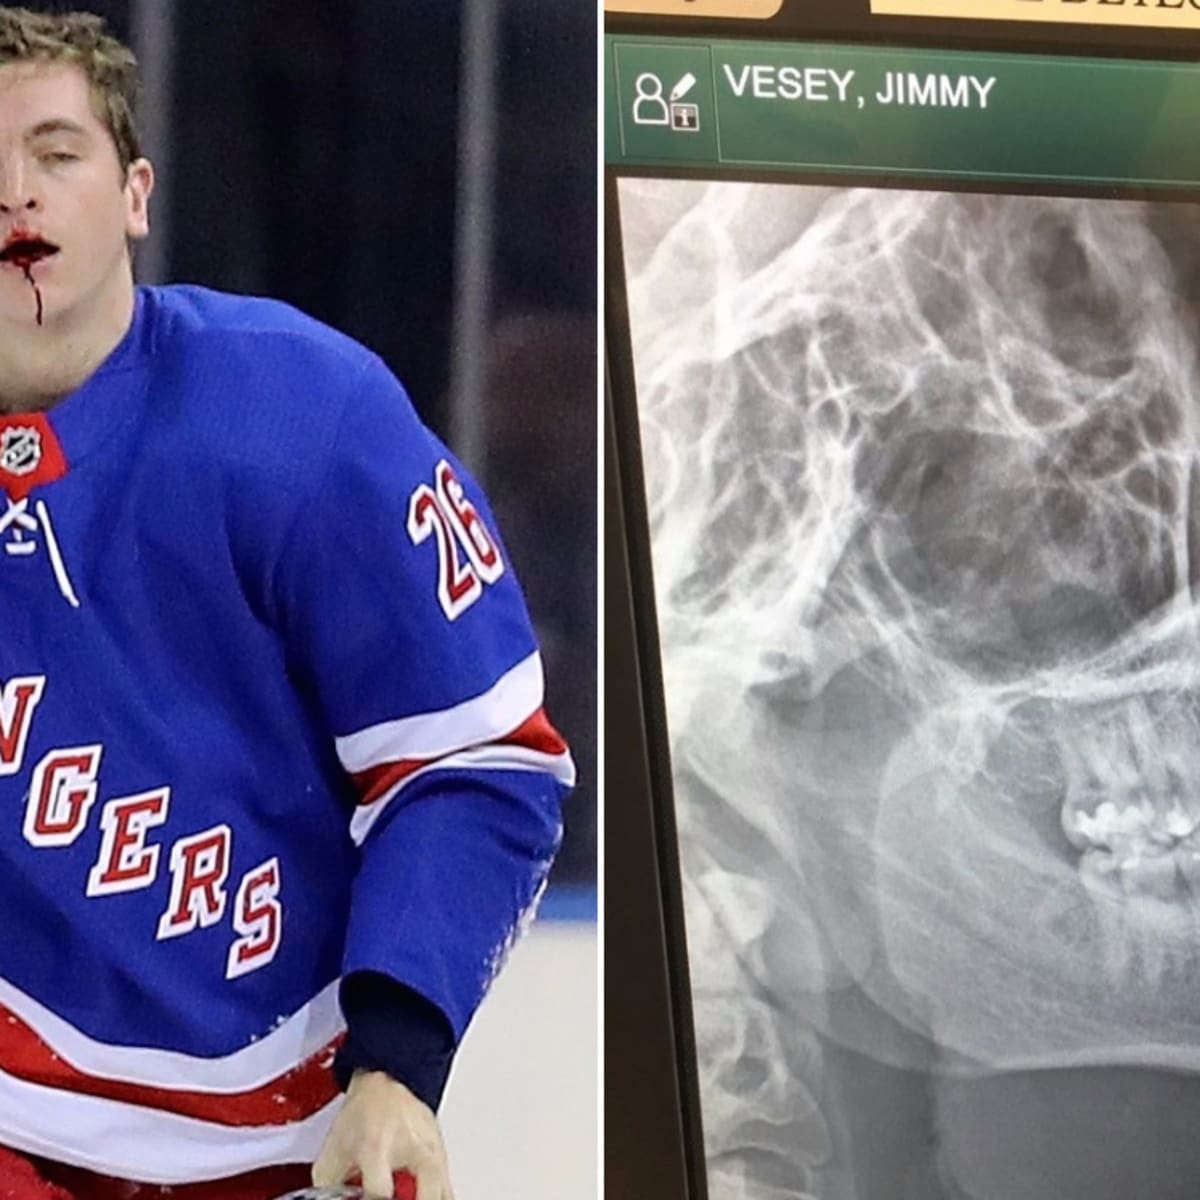 Jimmy Vesey Hockey Stats and Profile at